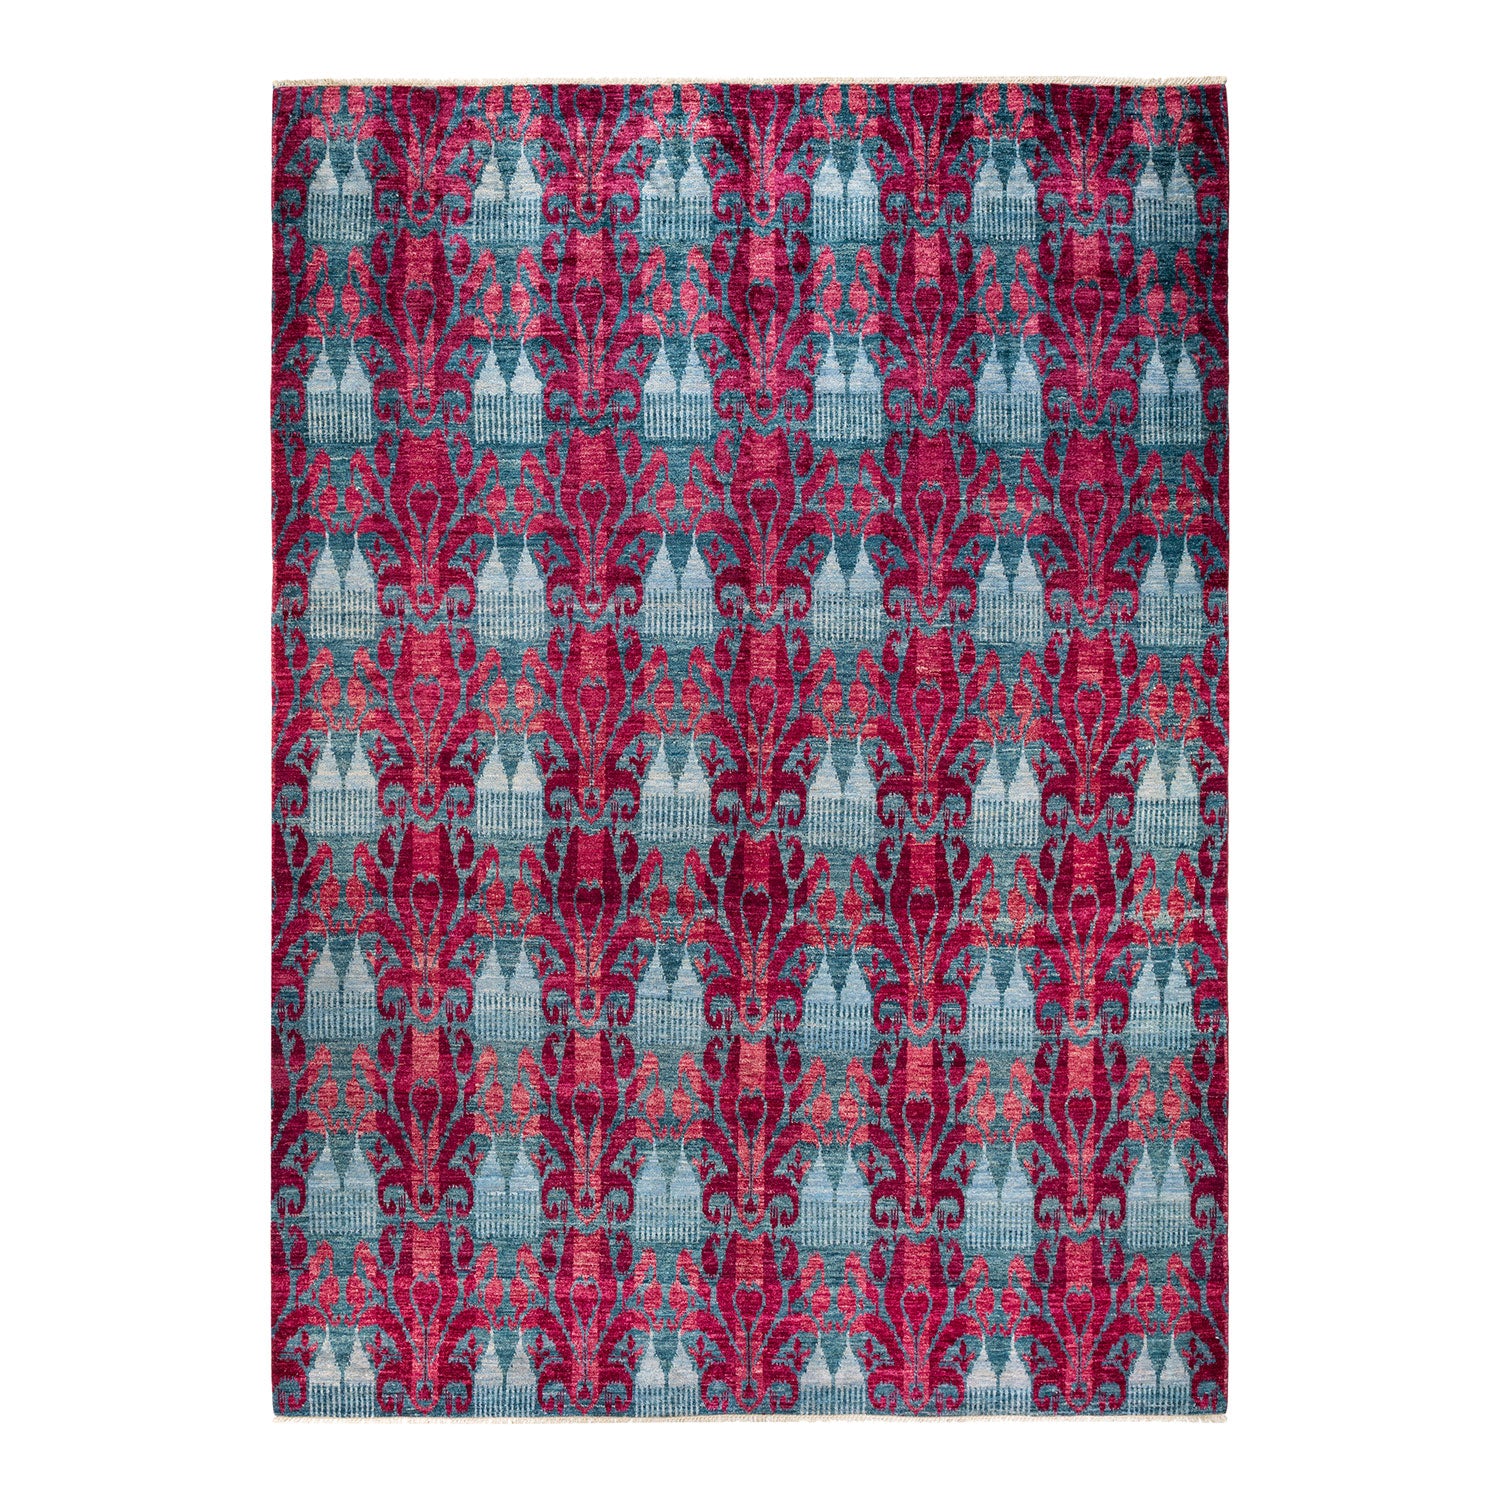 Intricate, symmetrical red textile with classical motifs on blue background.